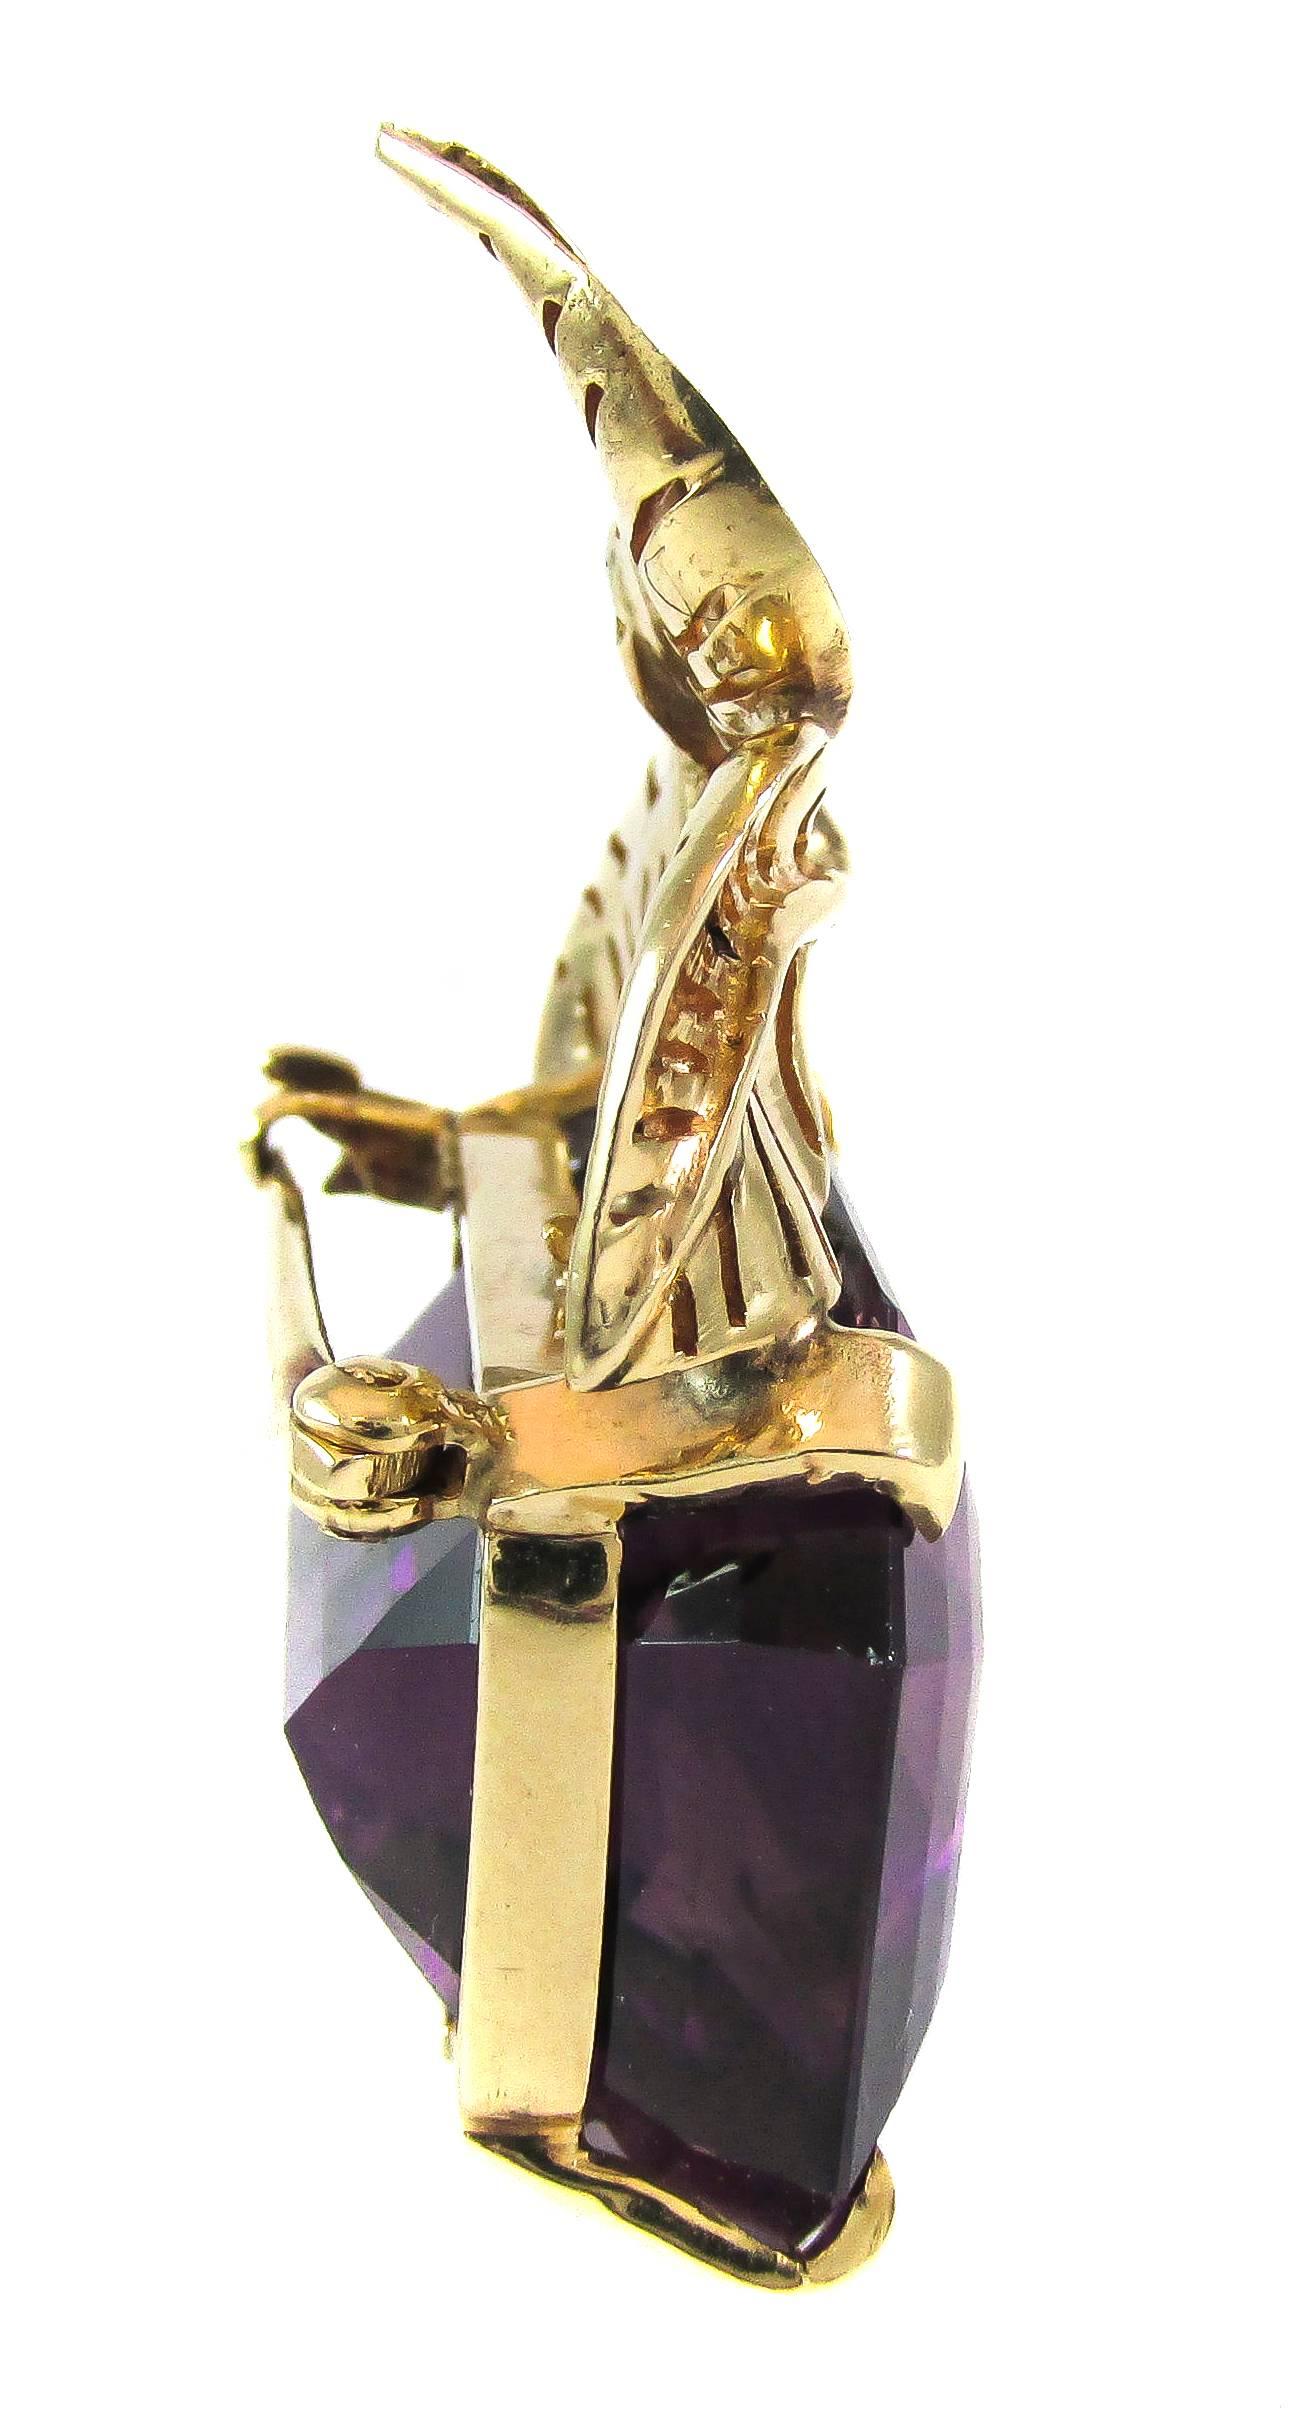 Rare Seaman Schepss 14 karat yellow gold brooch with excellent craftsmanship of leaf details at the top, set with a radiant deep purple emerald cut amethyst. This piece was specially commissioned by H.Stern in 1957 and is accompanies by the original